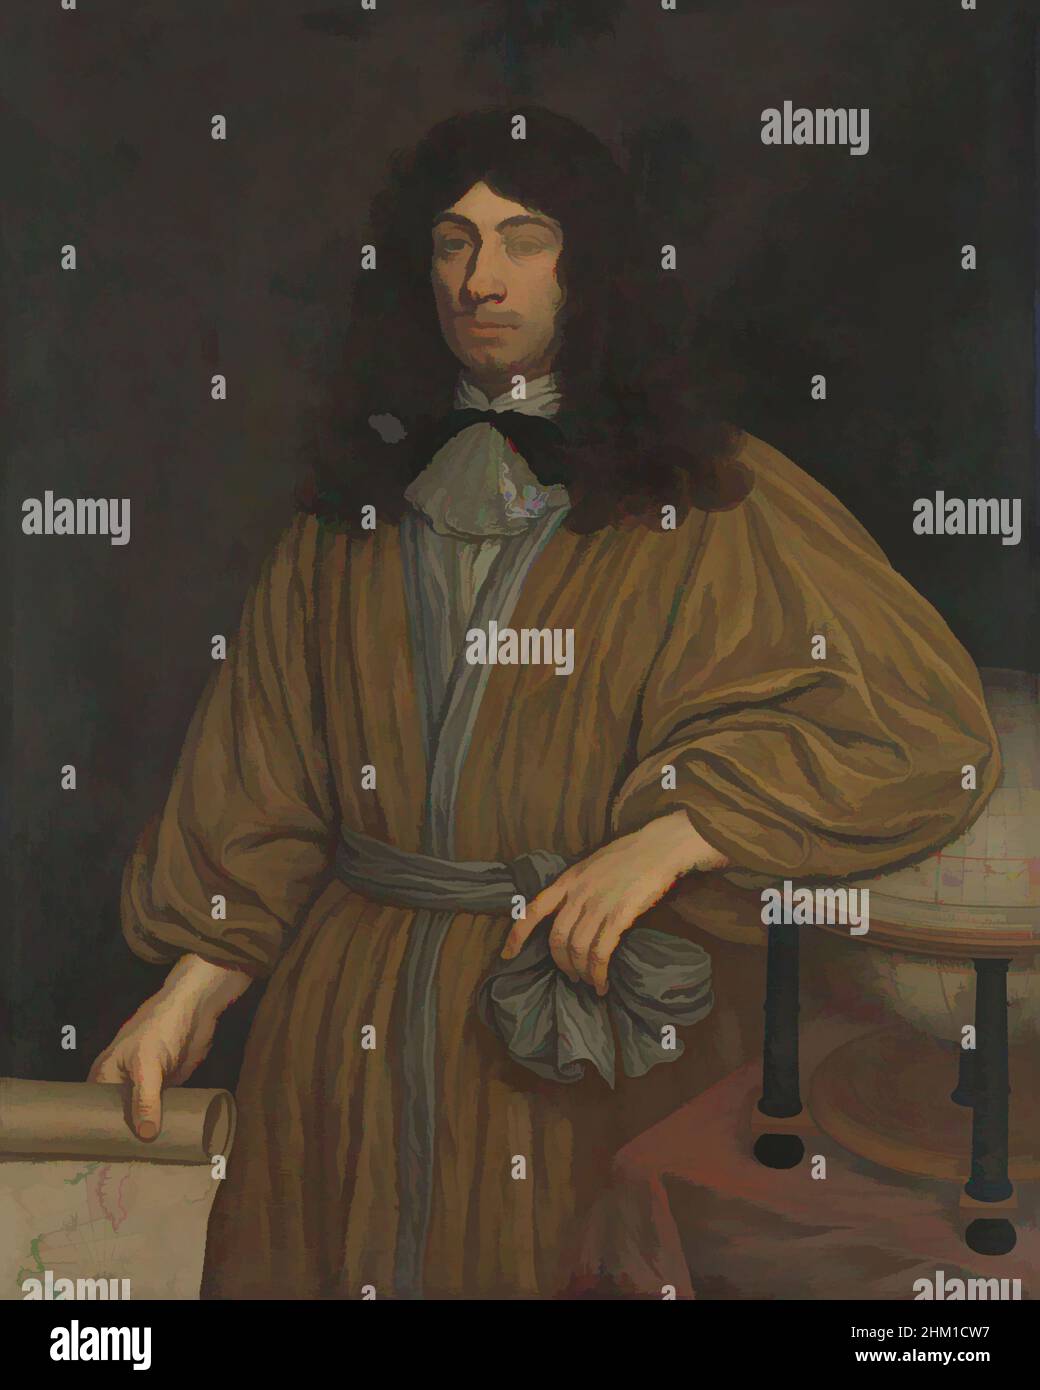 Art inspired by Johan Boudaen Courten (1635-1716), Lord of St Laurens, Schellach and Popkensburg. Councillor of Middelburg and Director of the East India Company, Portrait of Johan Boudaen Courten, Lord of St Laurens, Schellach and Popkensburg. Councillor of Middelburg and administrator, Classic works modernized by Artotop with a splash of modernity. Shapes, color and value, eye-catching visual impact on art. Emotions through freedom of artworks in a contemporary way. A timeless message pursuing a wildly creative new direction. Artists turning to the digital medium and creating the Artotop NFT Stock Photo